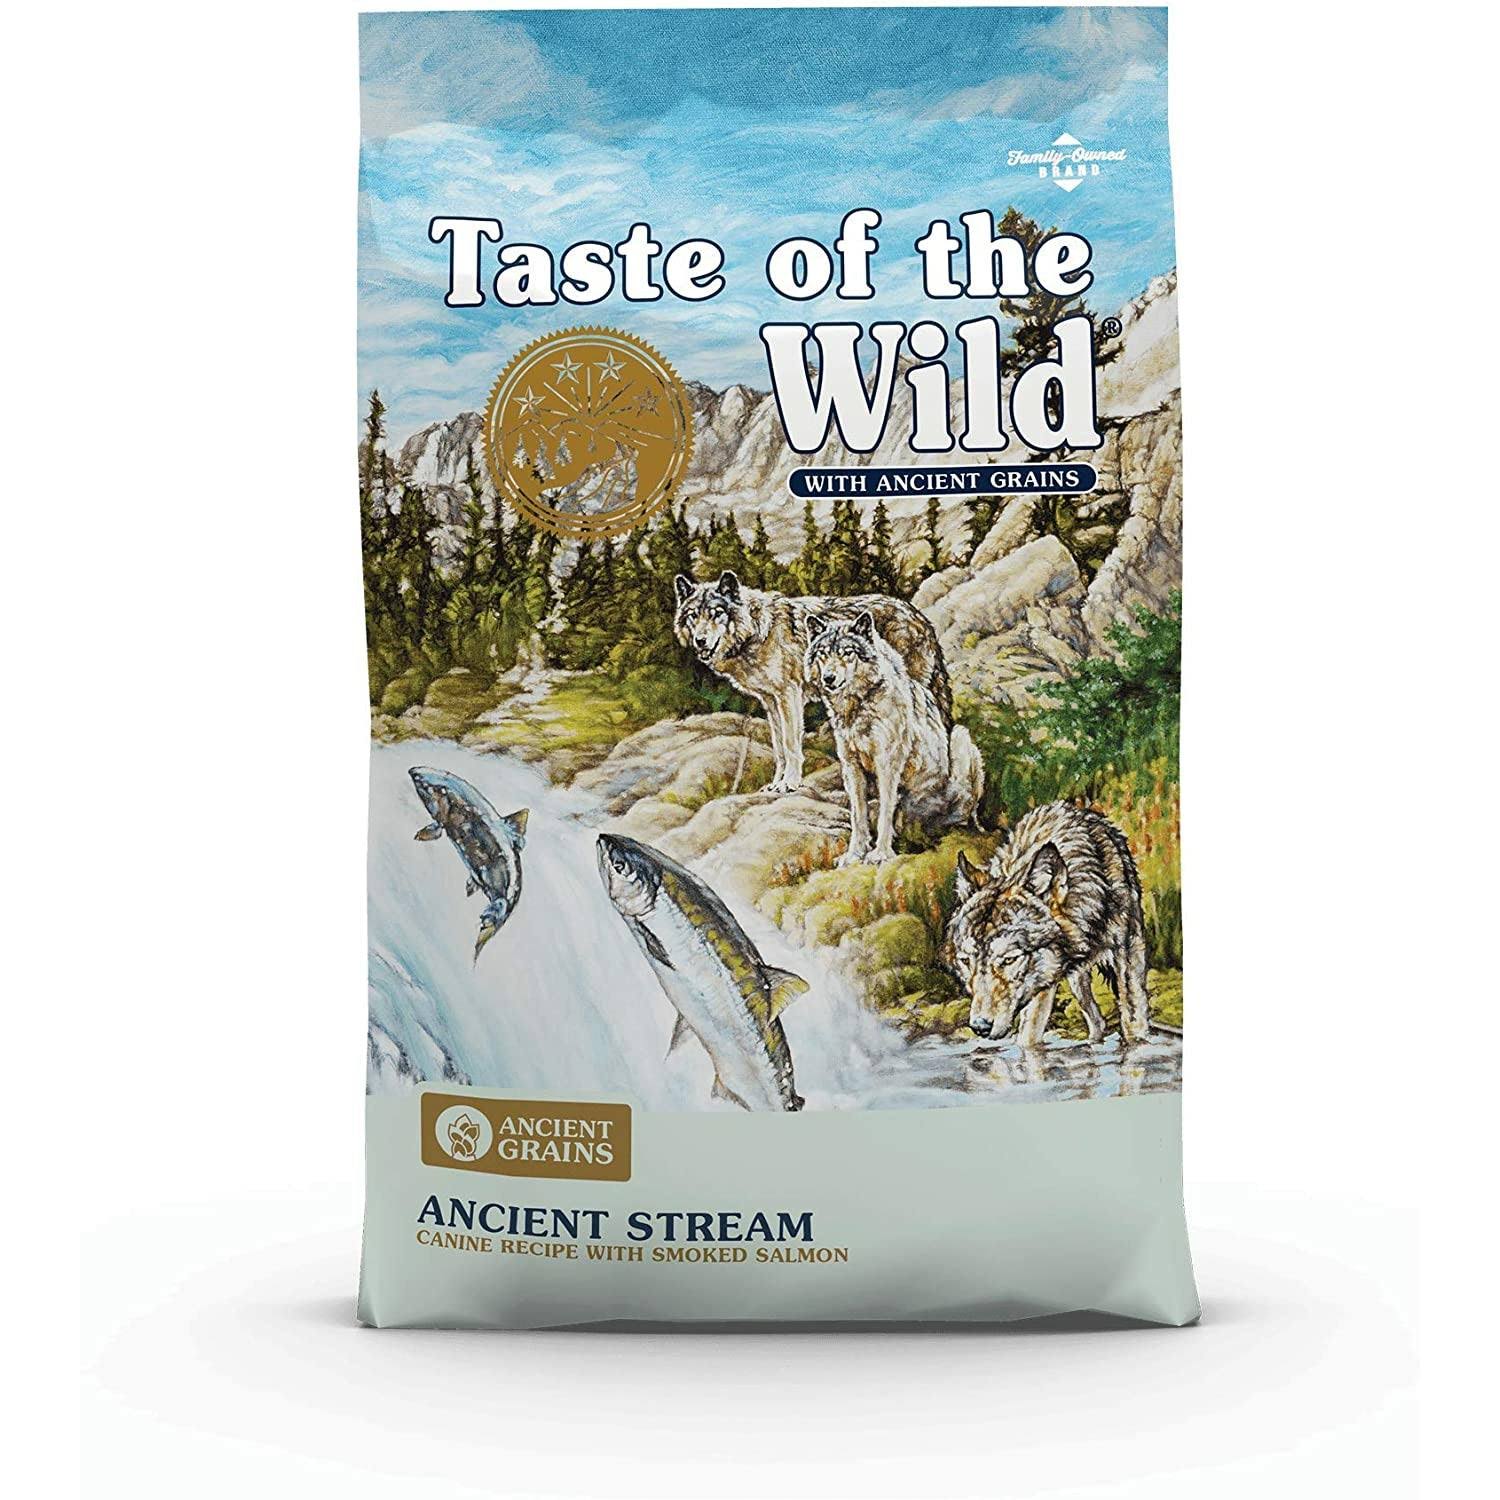 Taste of The Wild Ancient Stream with Smoked Salmon Dog Food 14 lbs